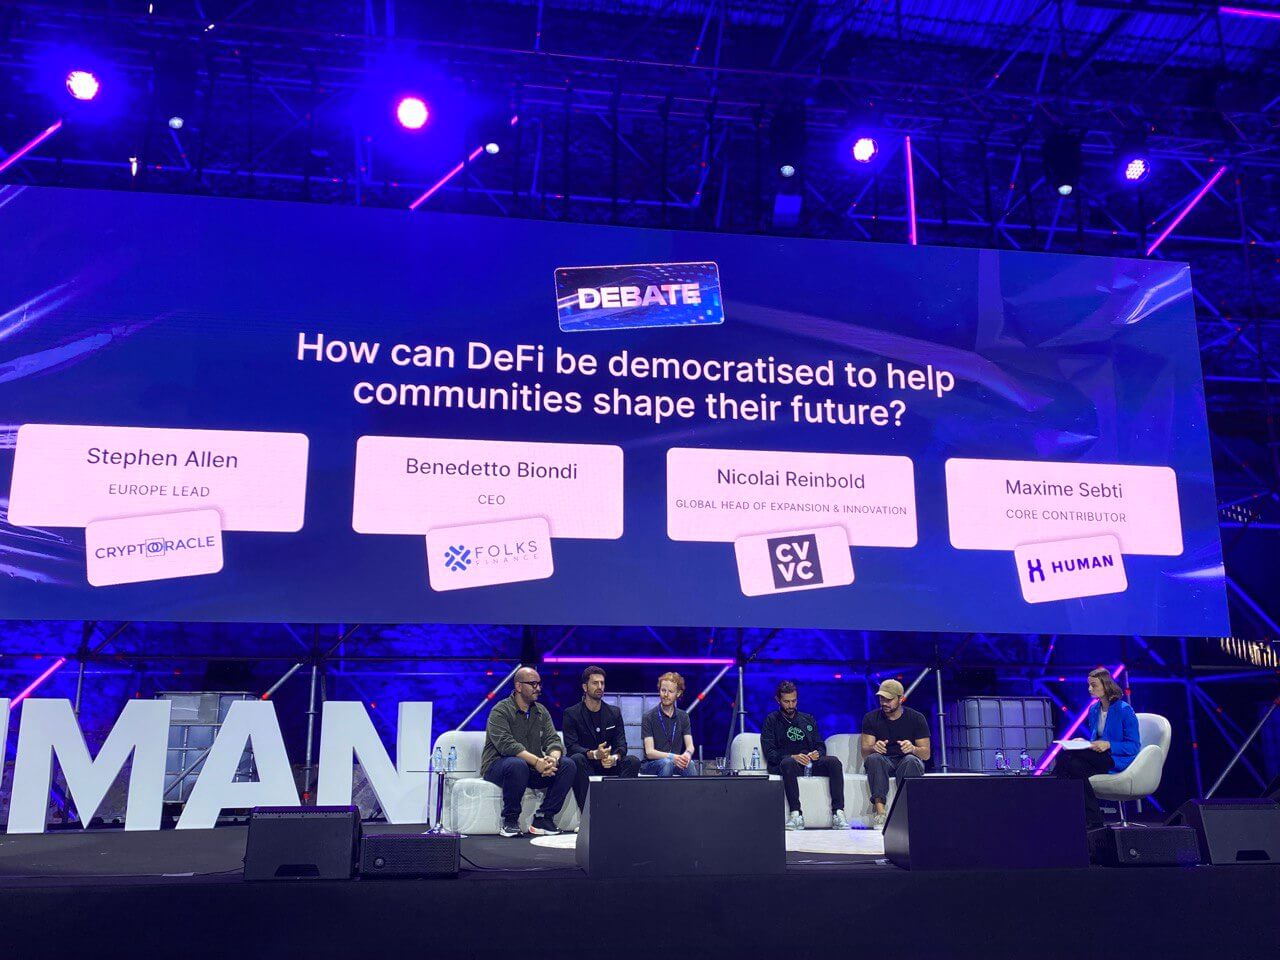 How can DeFi be democratised to help communities shape their future?